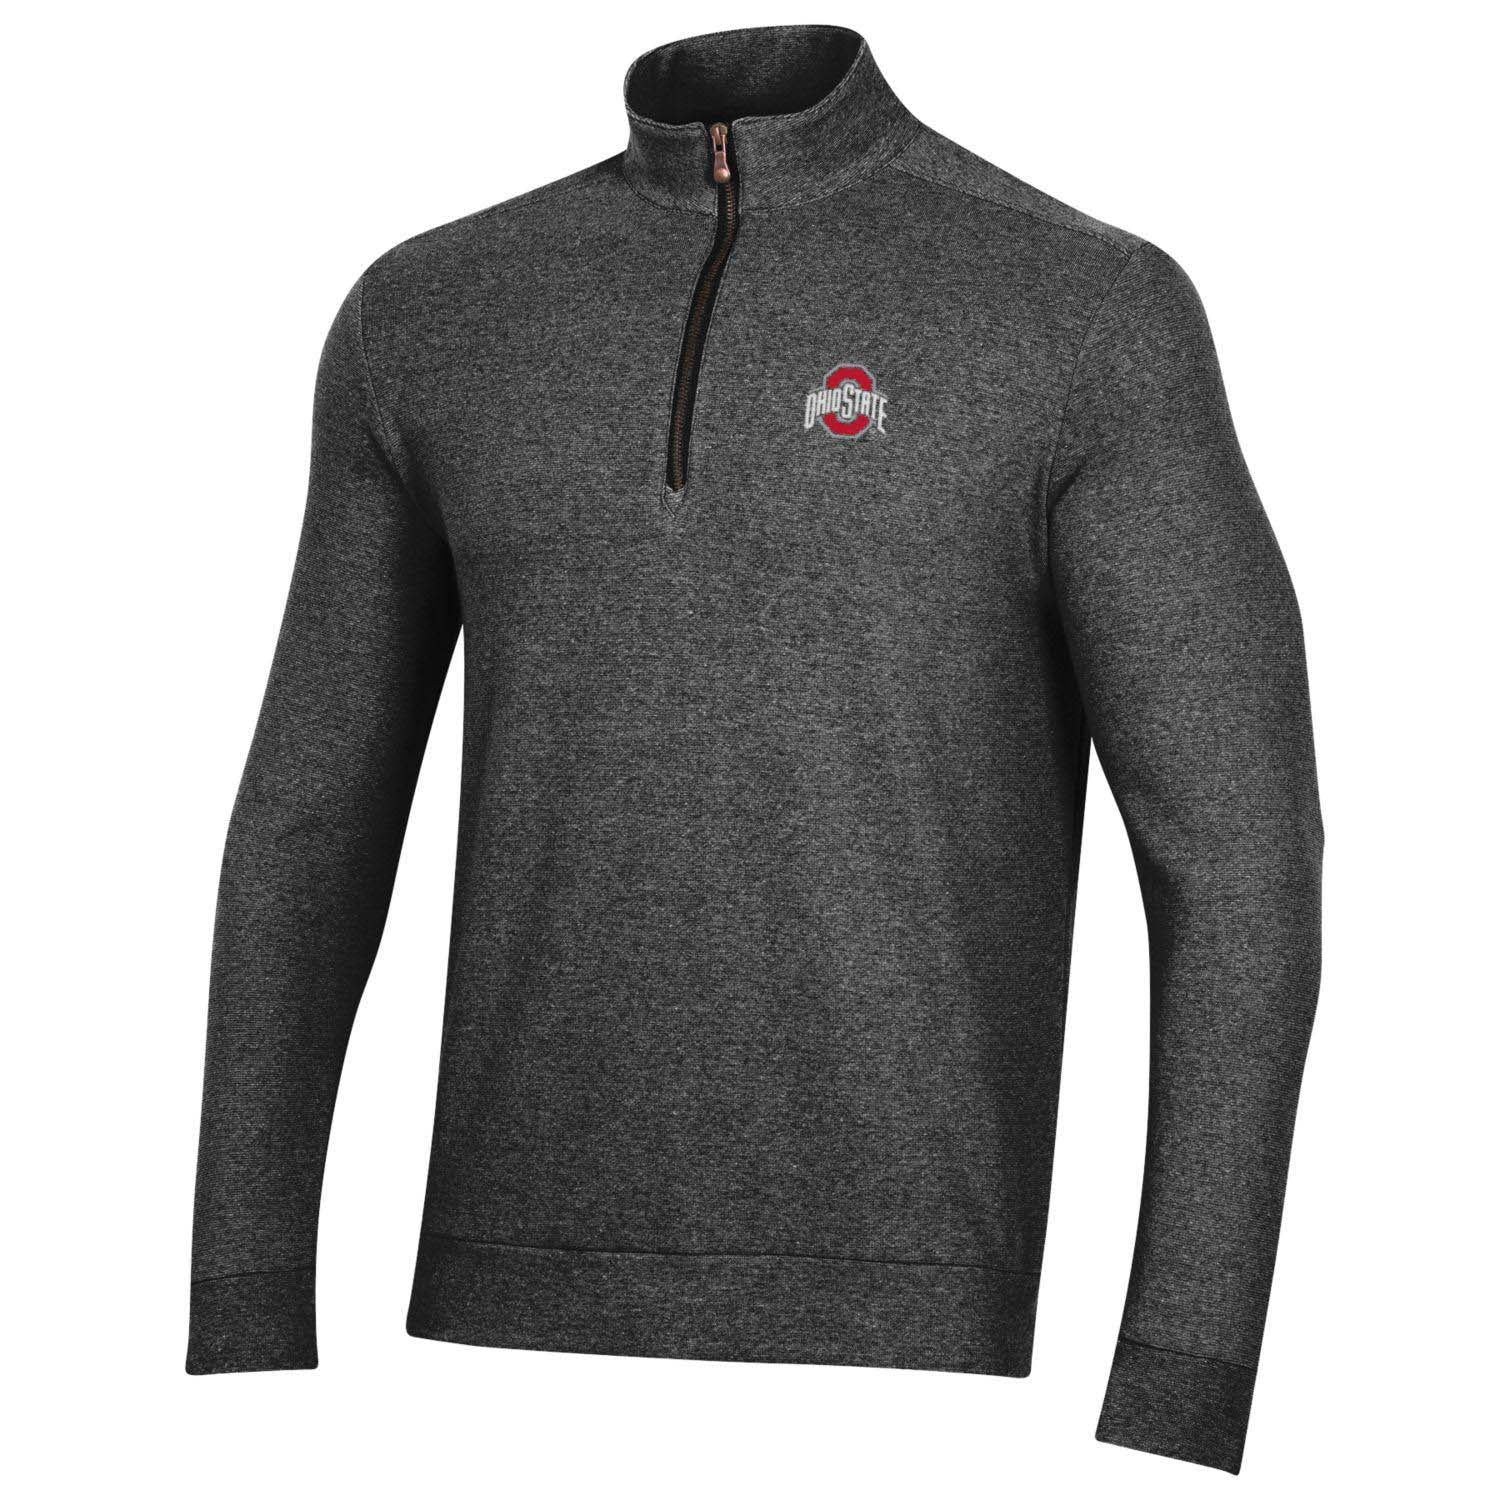 4 Zip is the perfect long sleeve t-shirt